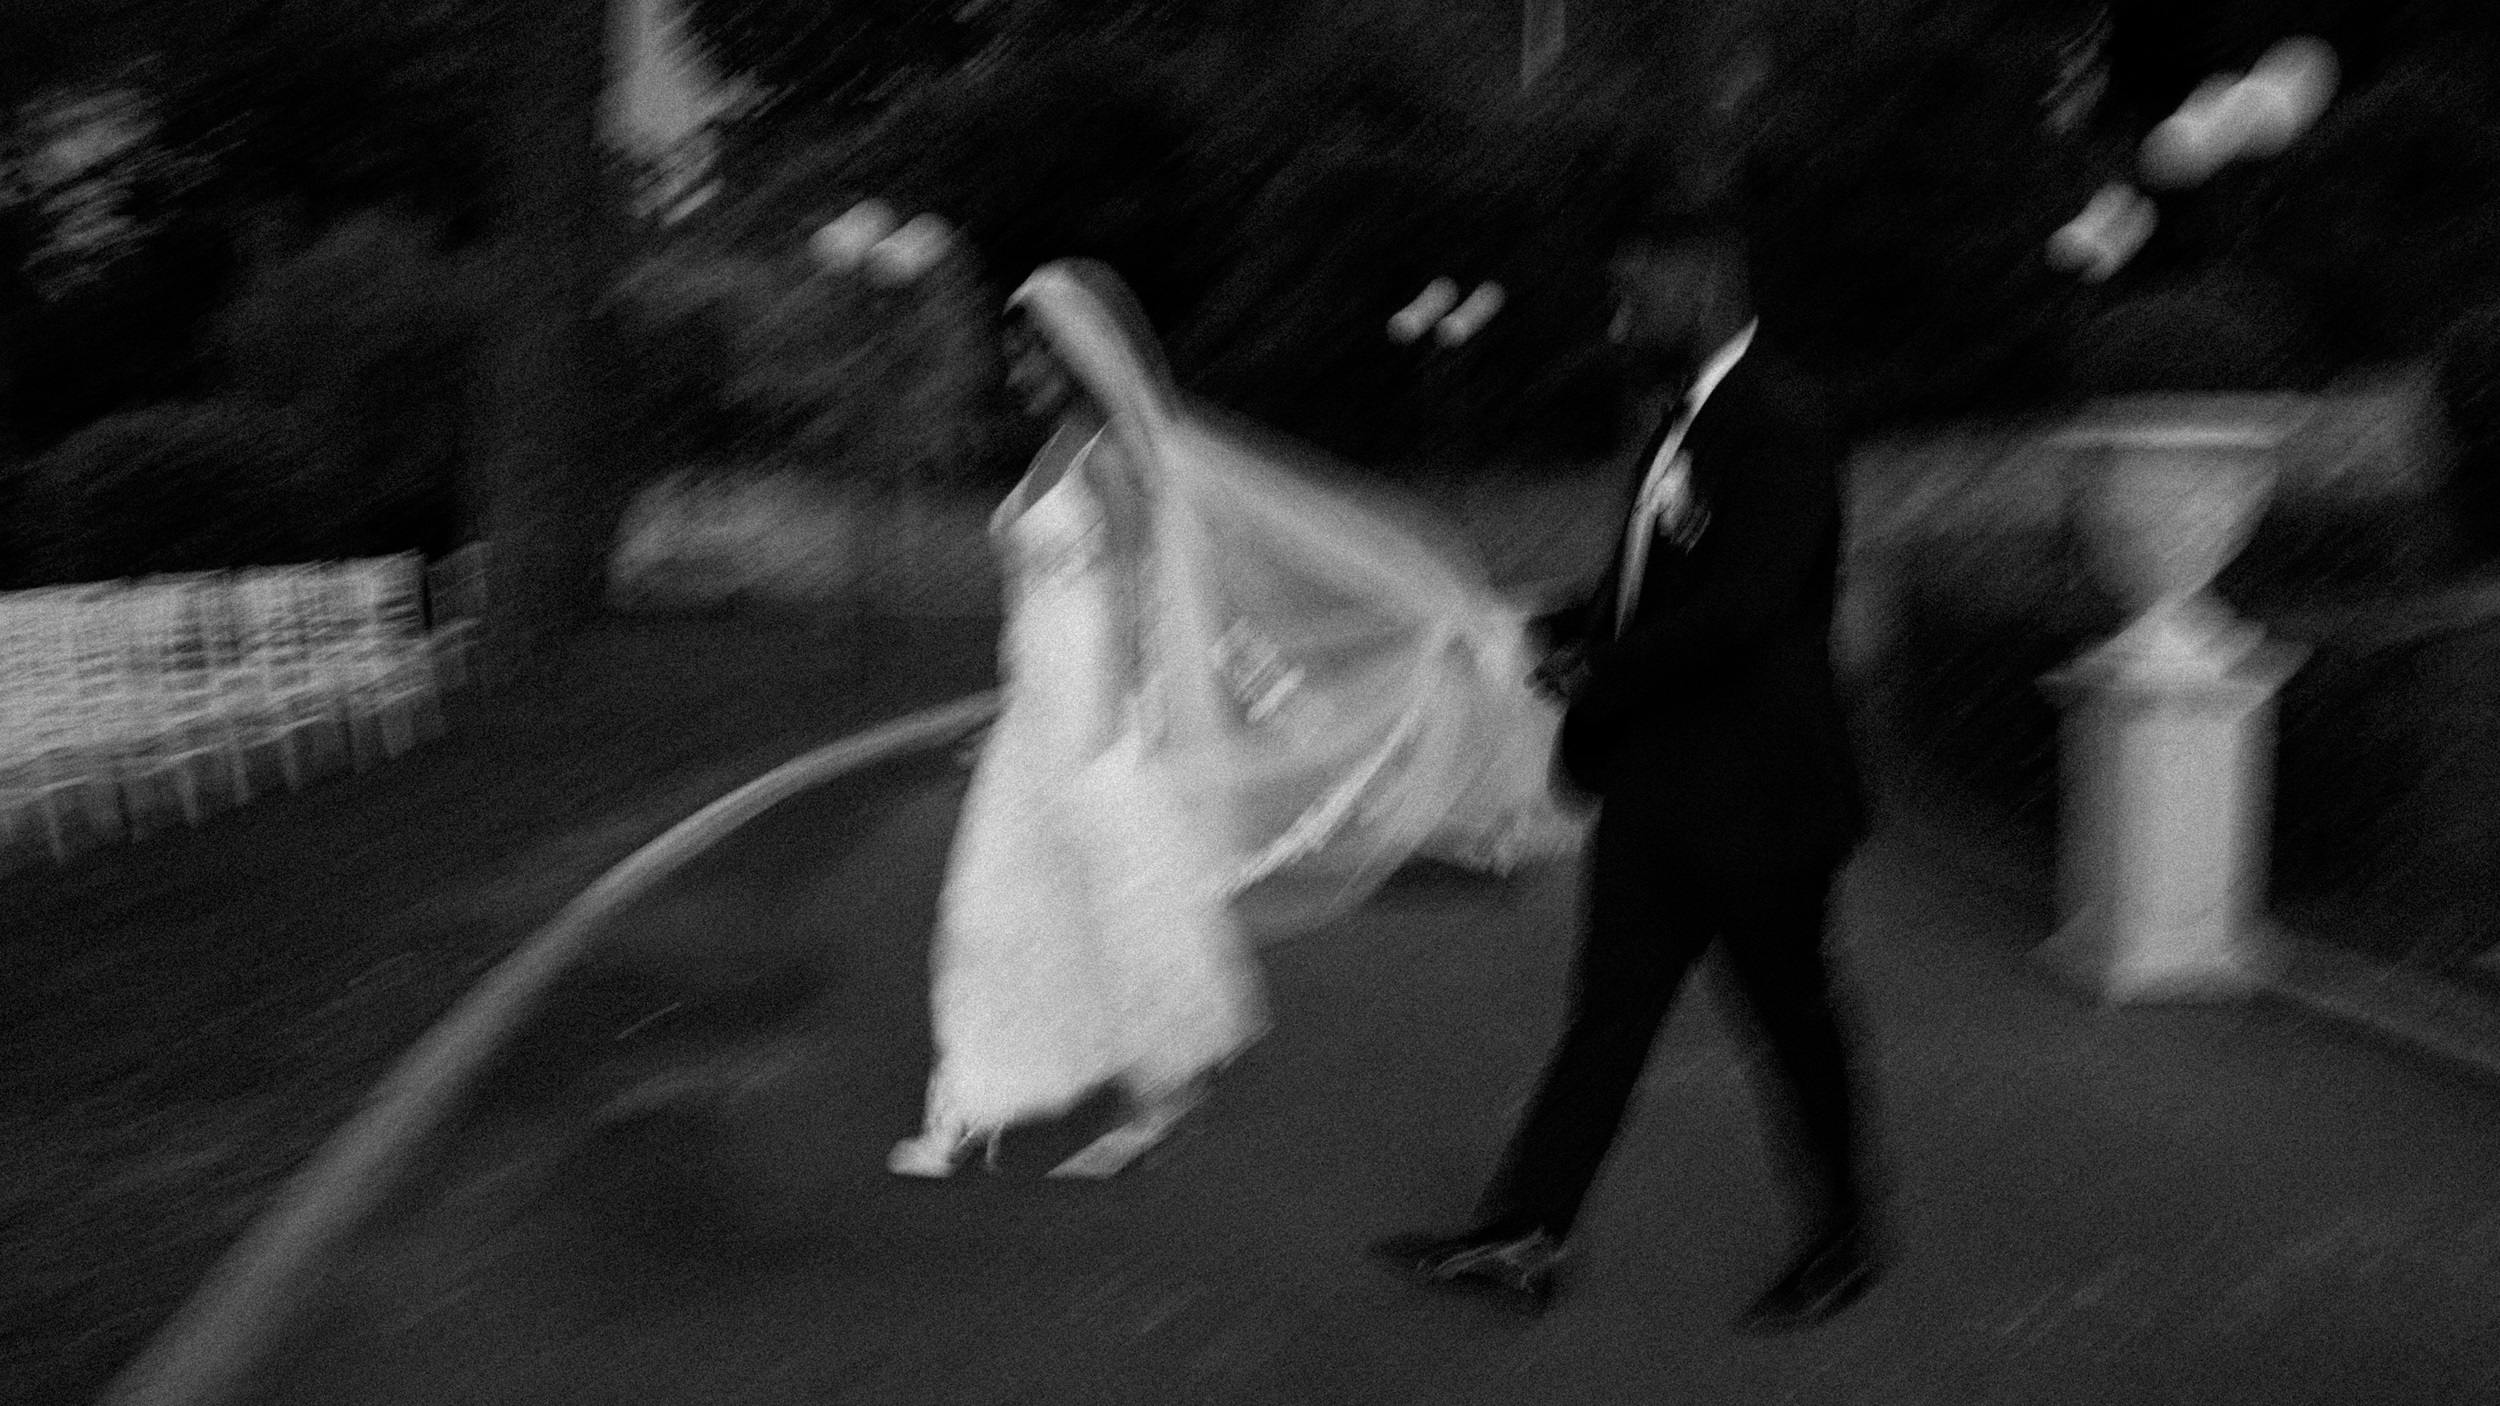 Wedding photography by Stefano Destro is for the wildly in love